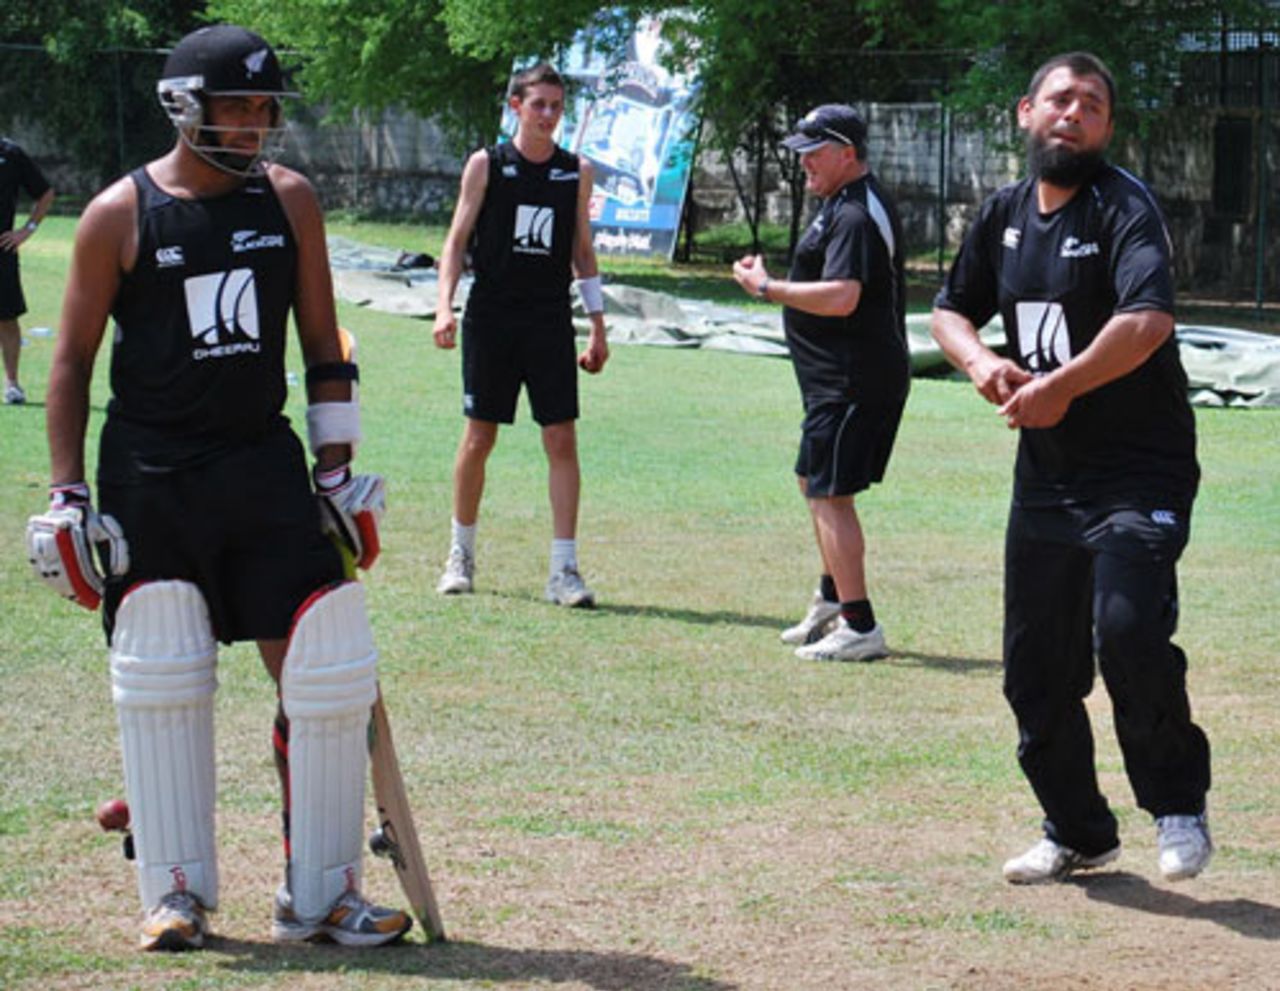 Saqlain Mushtaq gives New Zealand some spinning tips, Colts cricket ground, Colombo, August 8, 2009